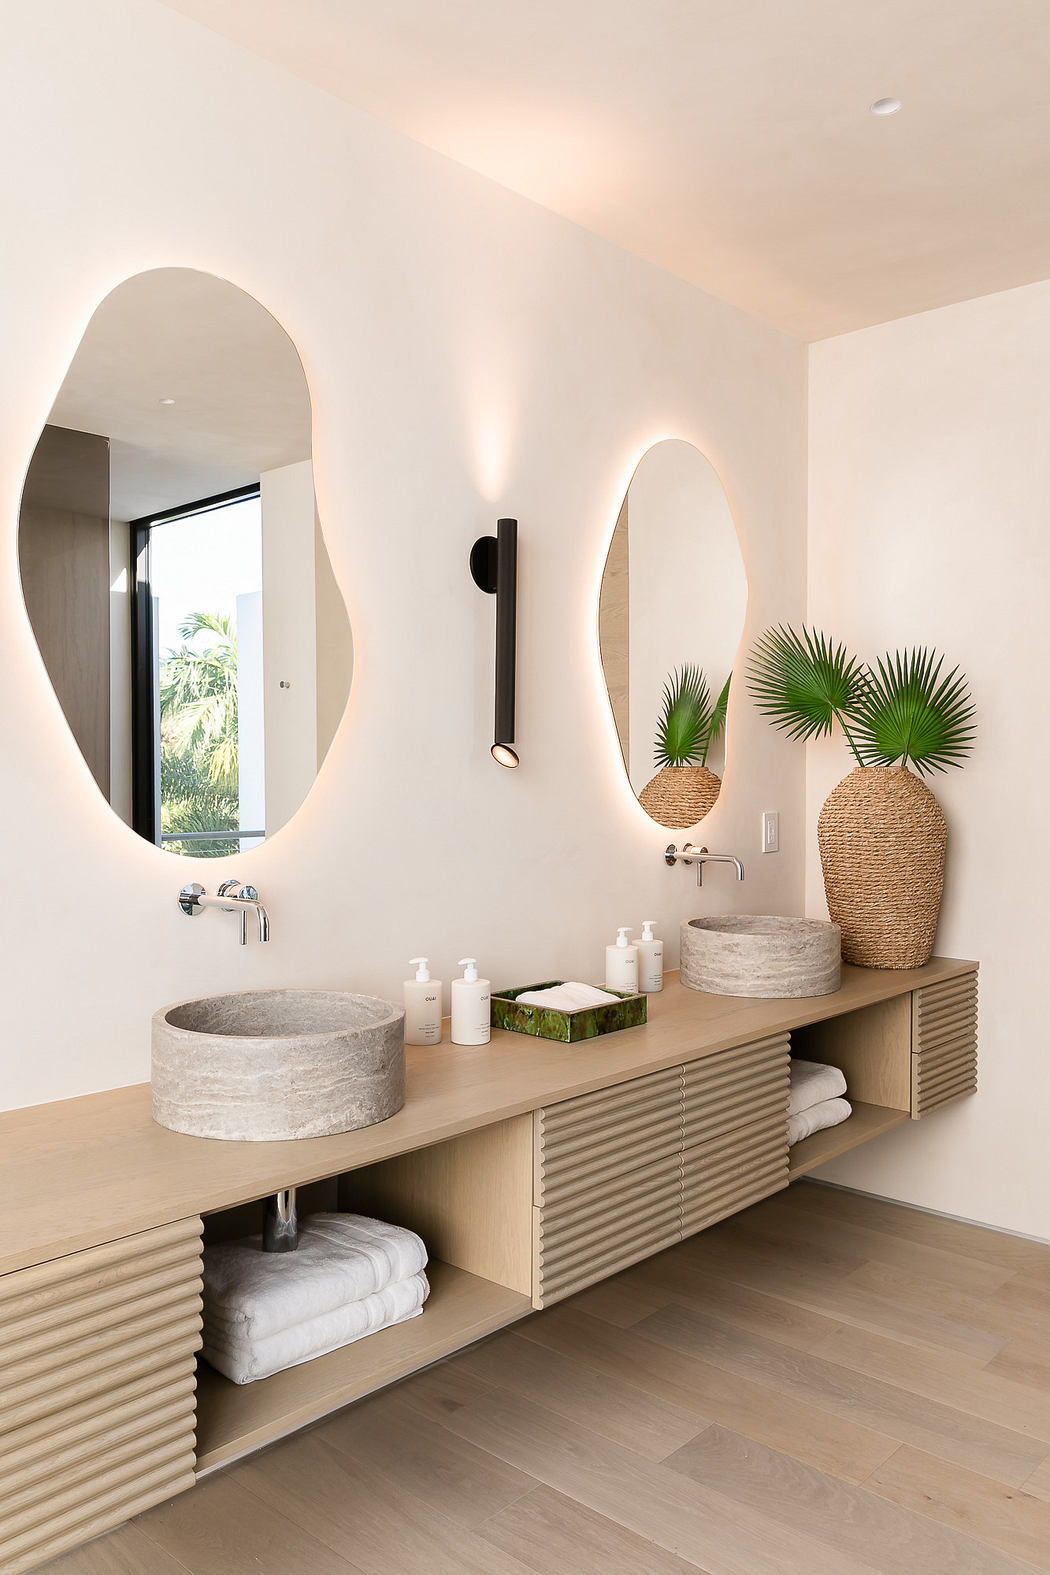 Modern bathroom with twin vessel sinks, oval mirrors, and wooden vanity.